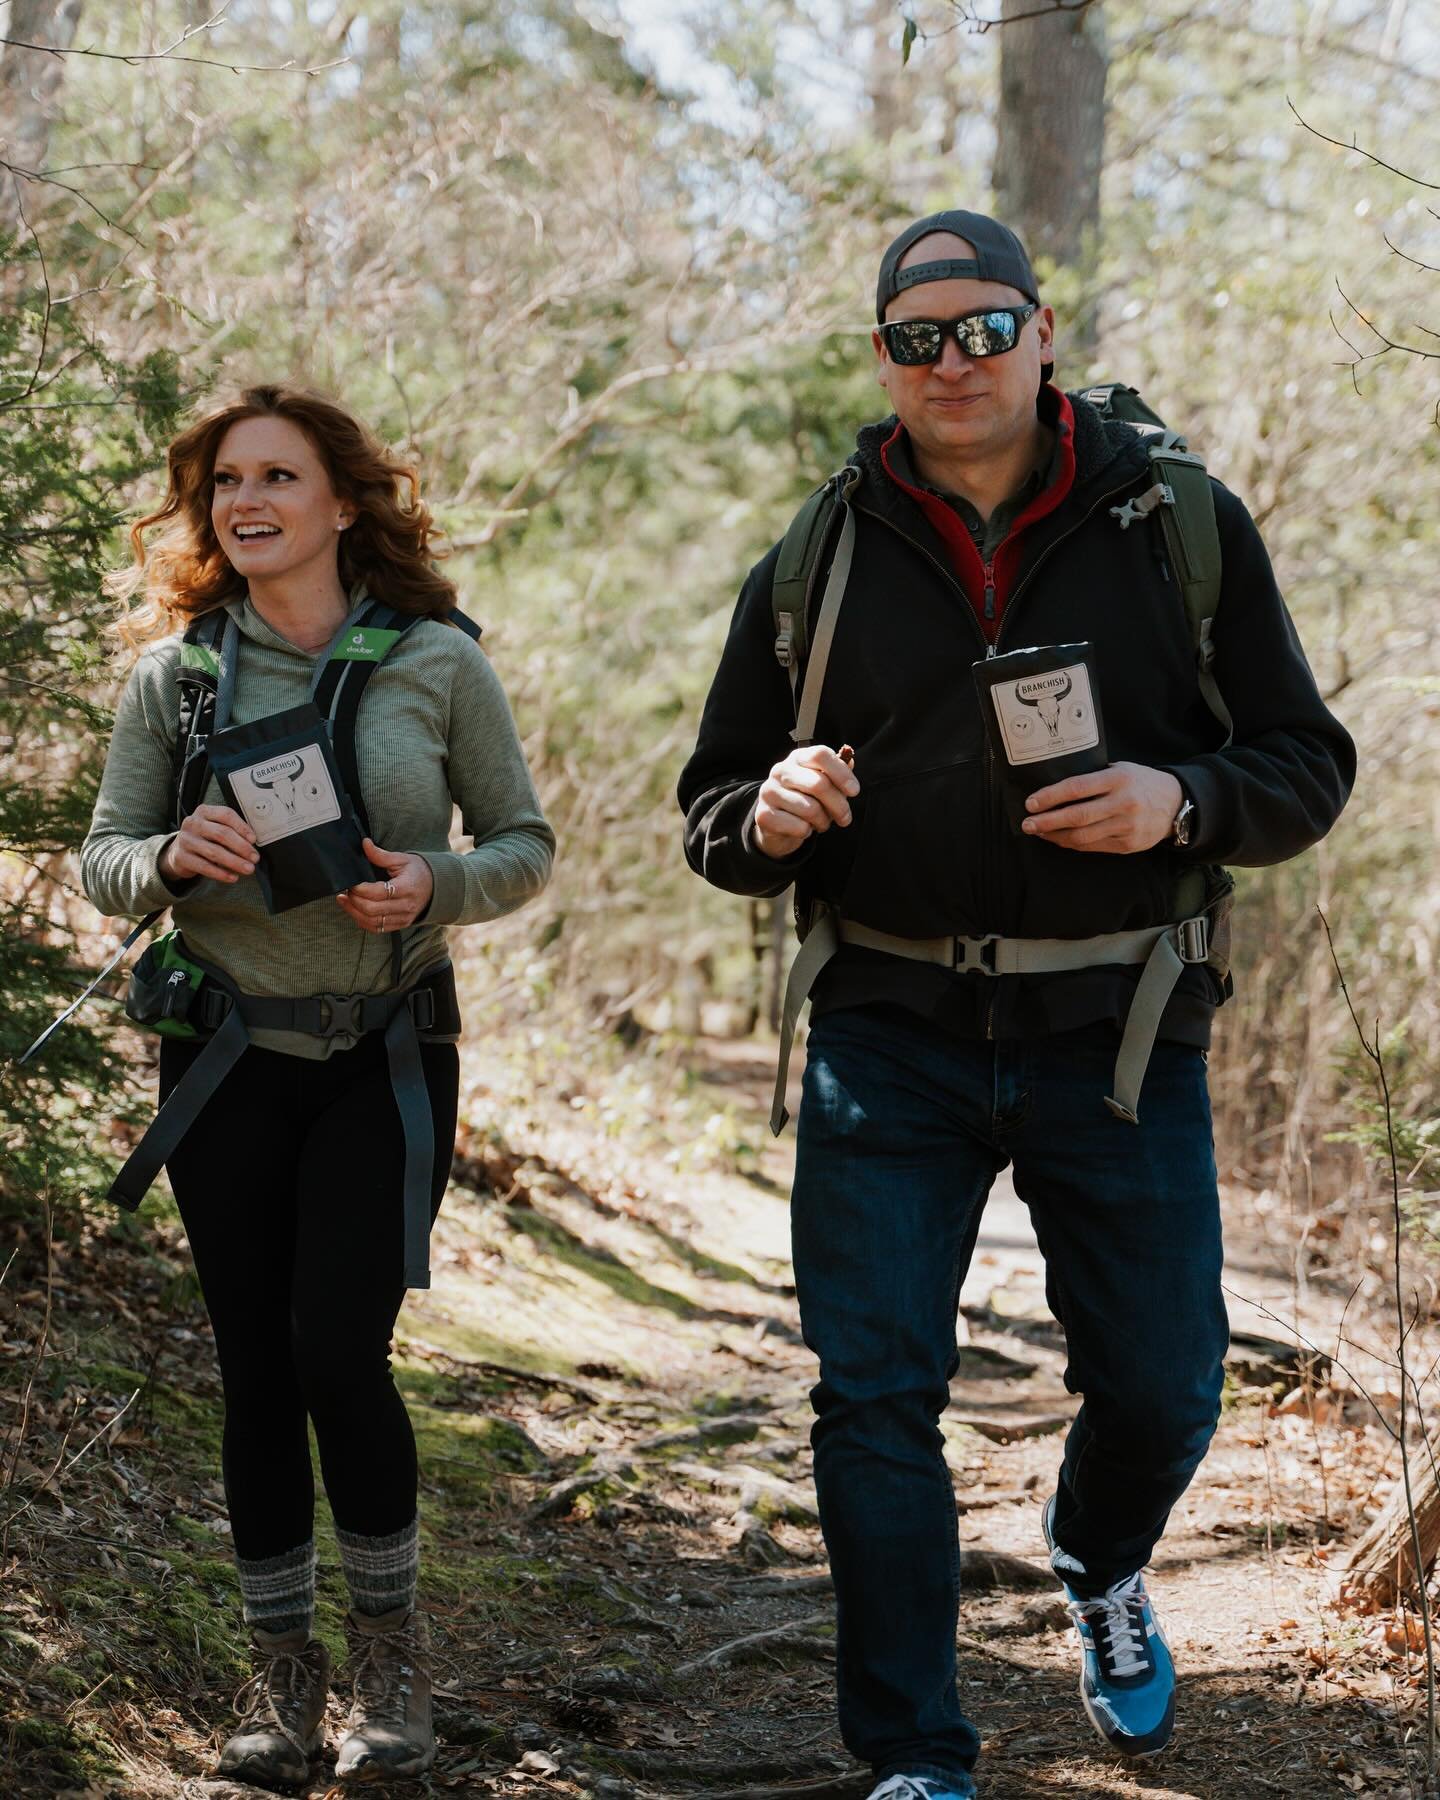 🥾The trails have been calling our name&hellip;!

What are your hiking plans (other than bringing @branchsish_jerky)?

Let us know your favorite trails in the comments and share this with your hiking buddies!

#beefjerky #beefjerkylover #beefjerkytim